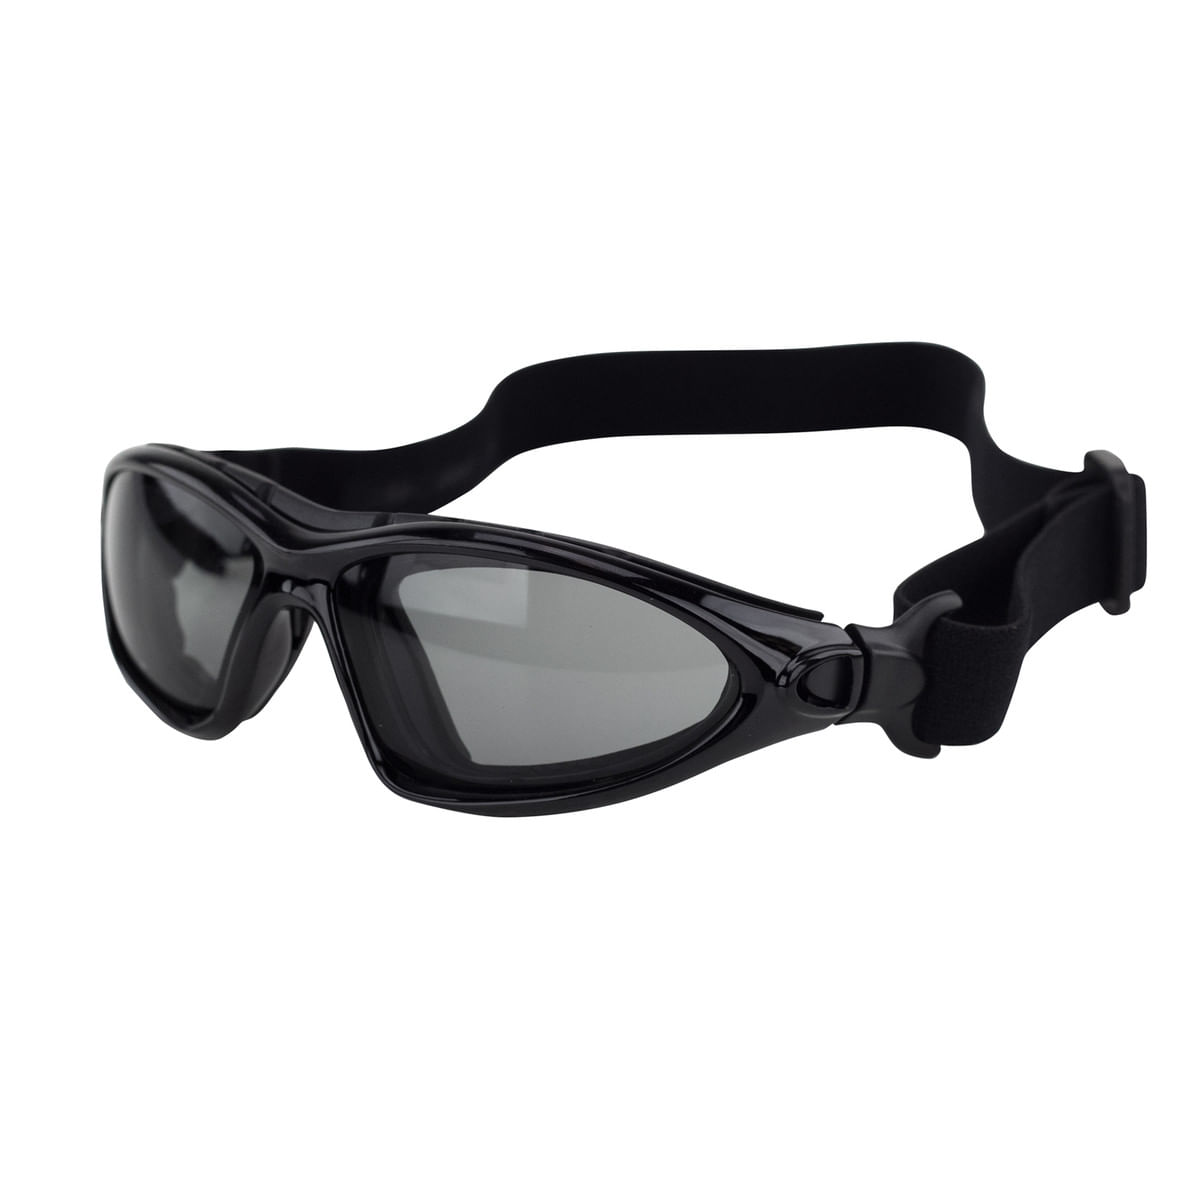 Bobster Lentes Road Master Convertibles Gloss Black Smoked Photochromic